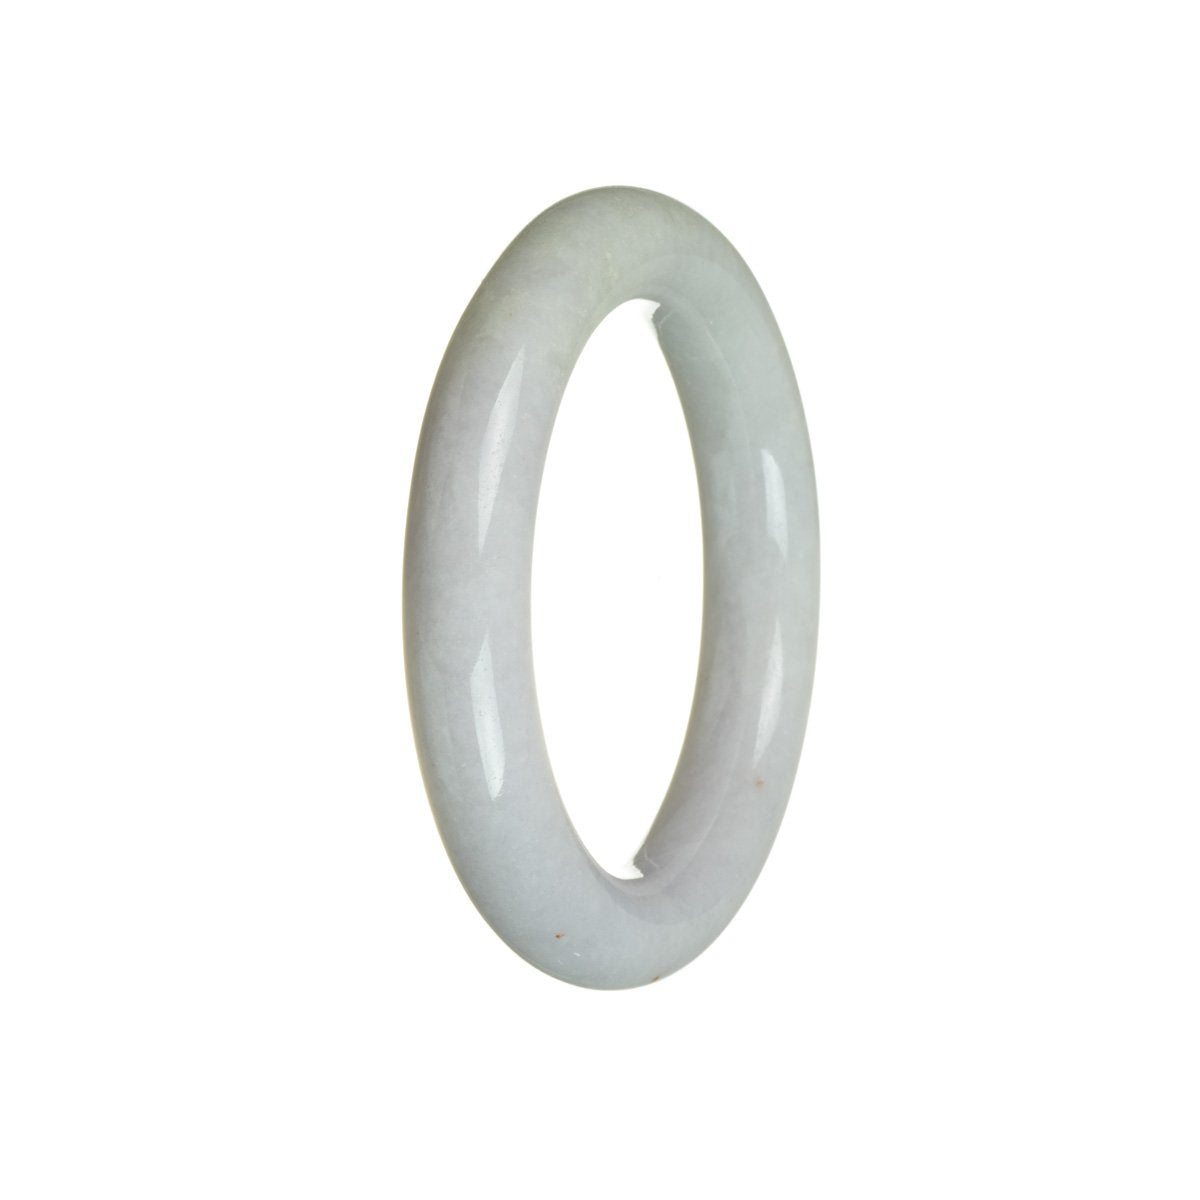 Genuine Grade A Lavender with Pale Green Traditional Jade Bangle Bracelet - 54mm Round